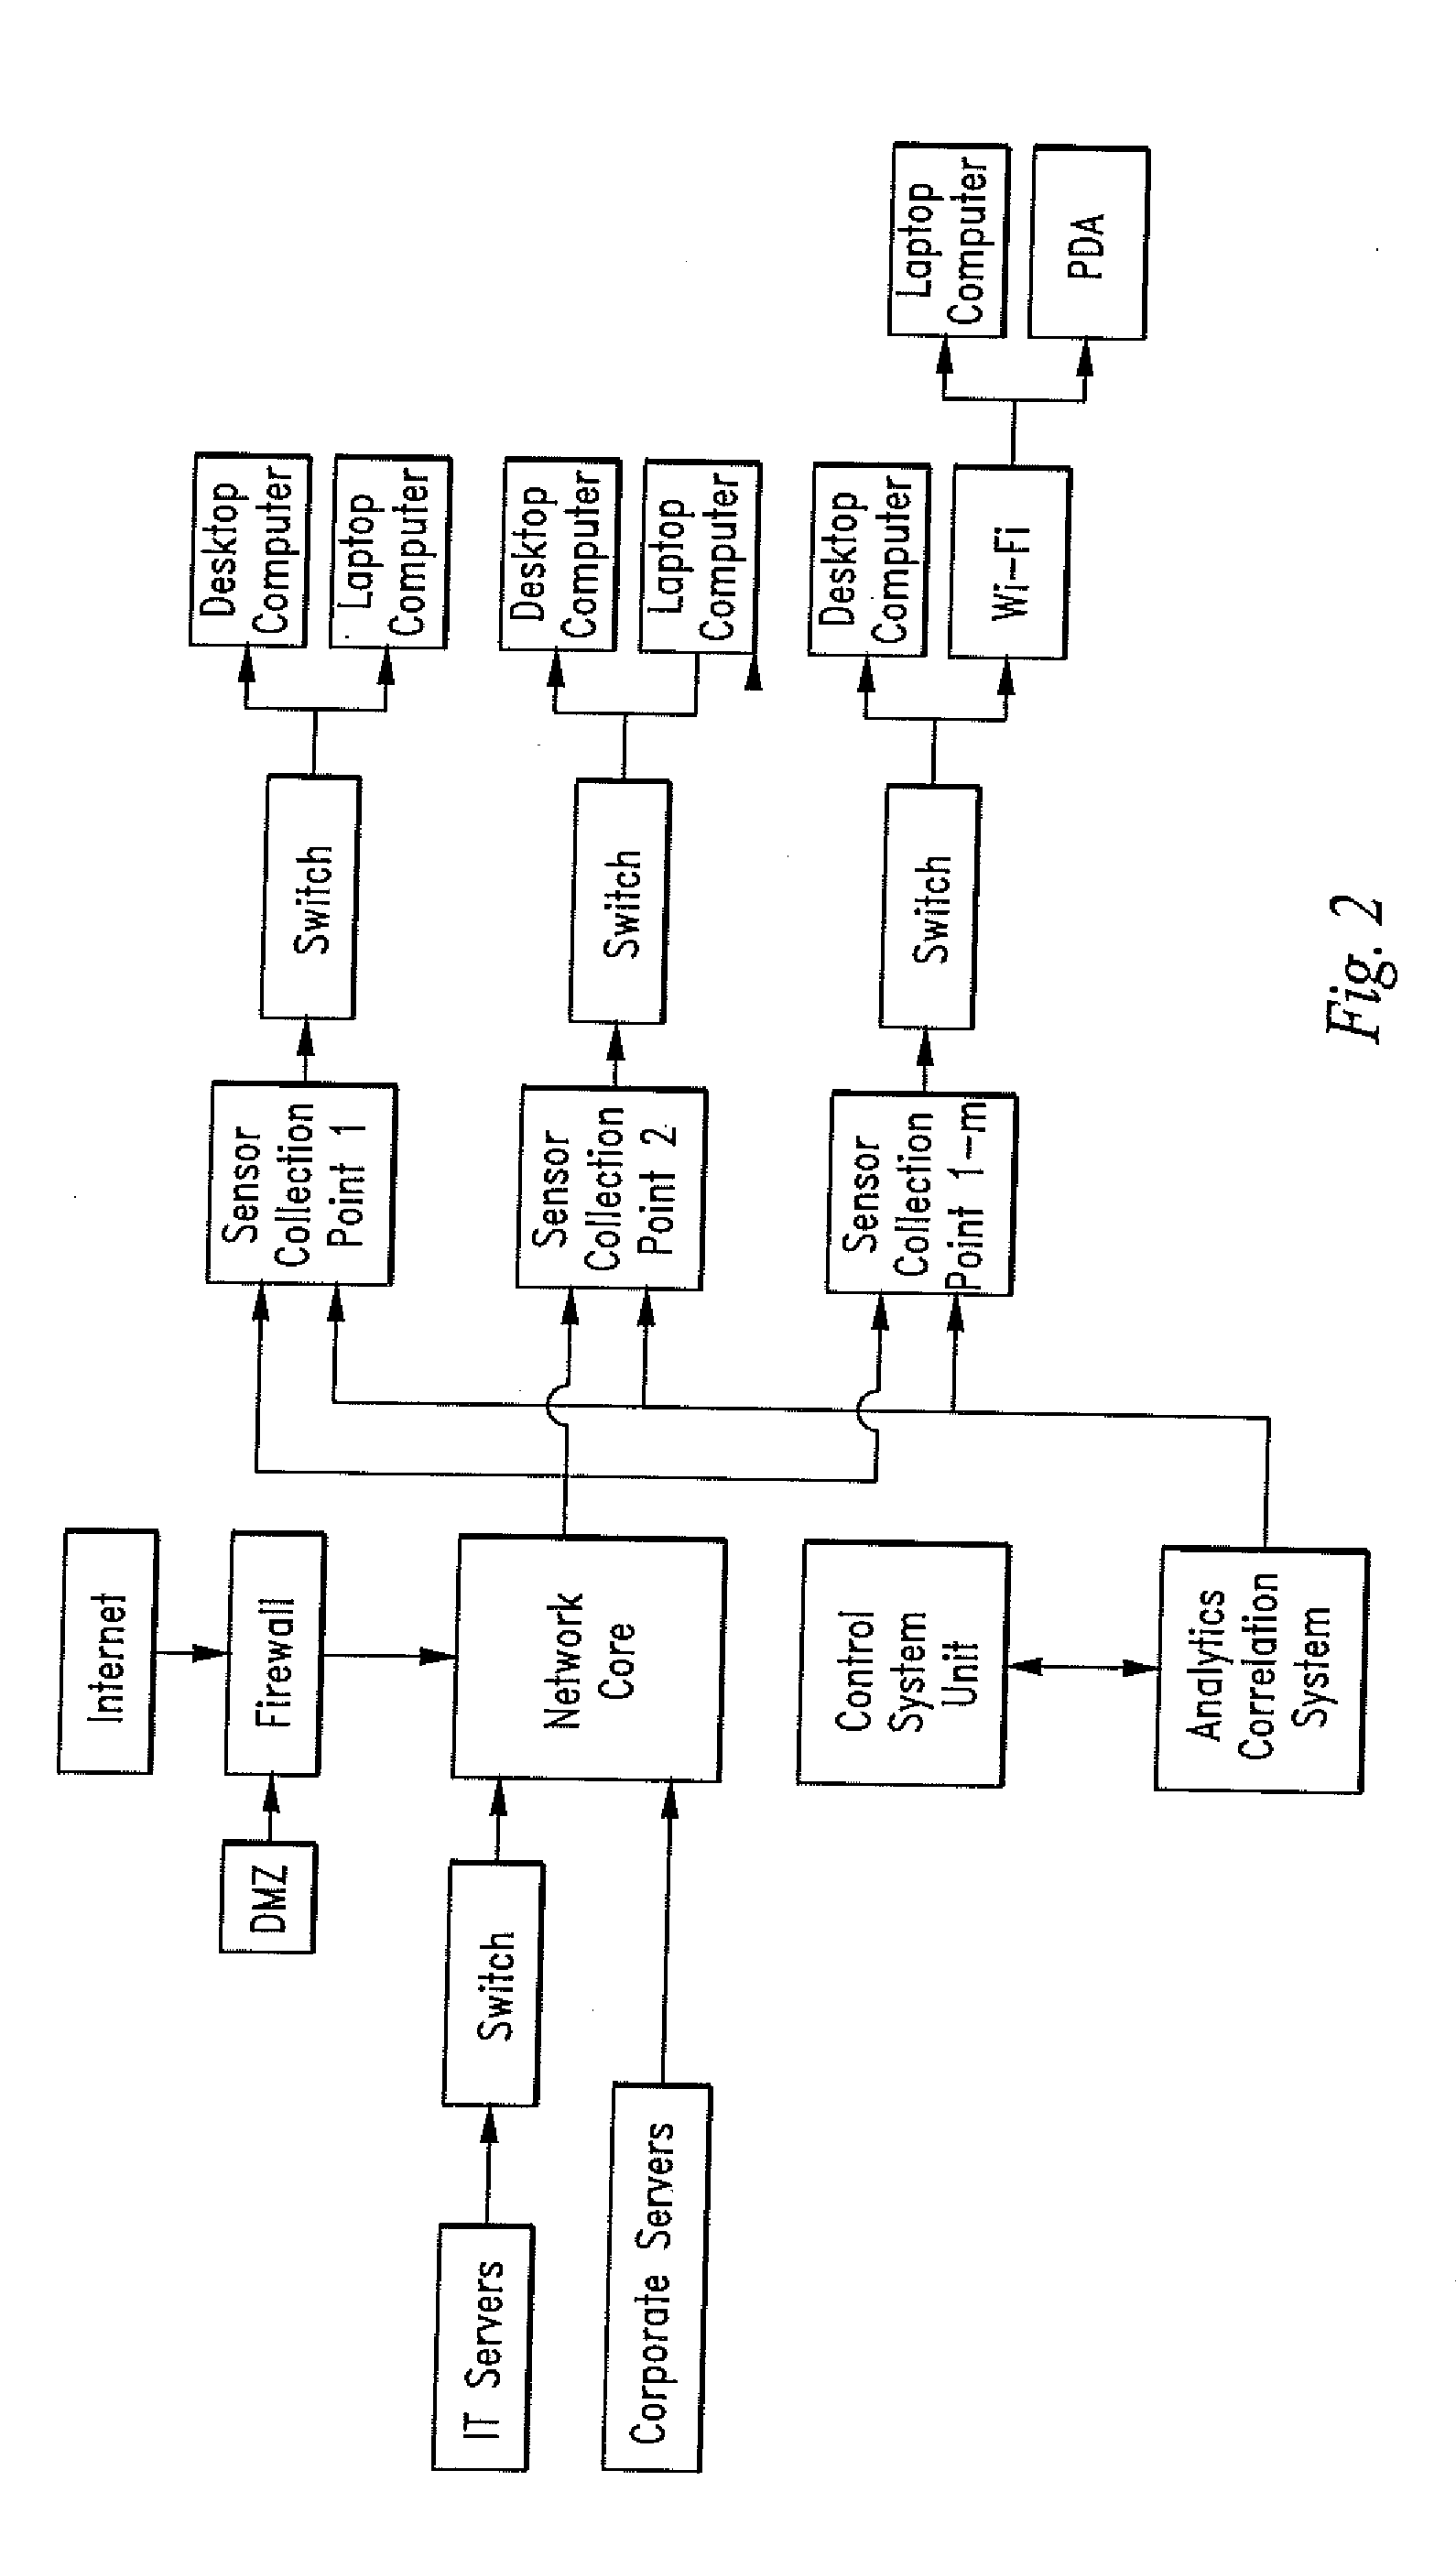 Device and Method for Detection of Anomalous Behavior in a Computer Network